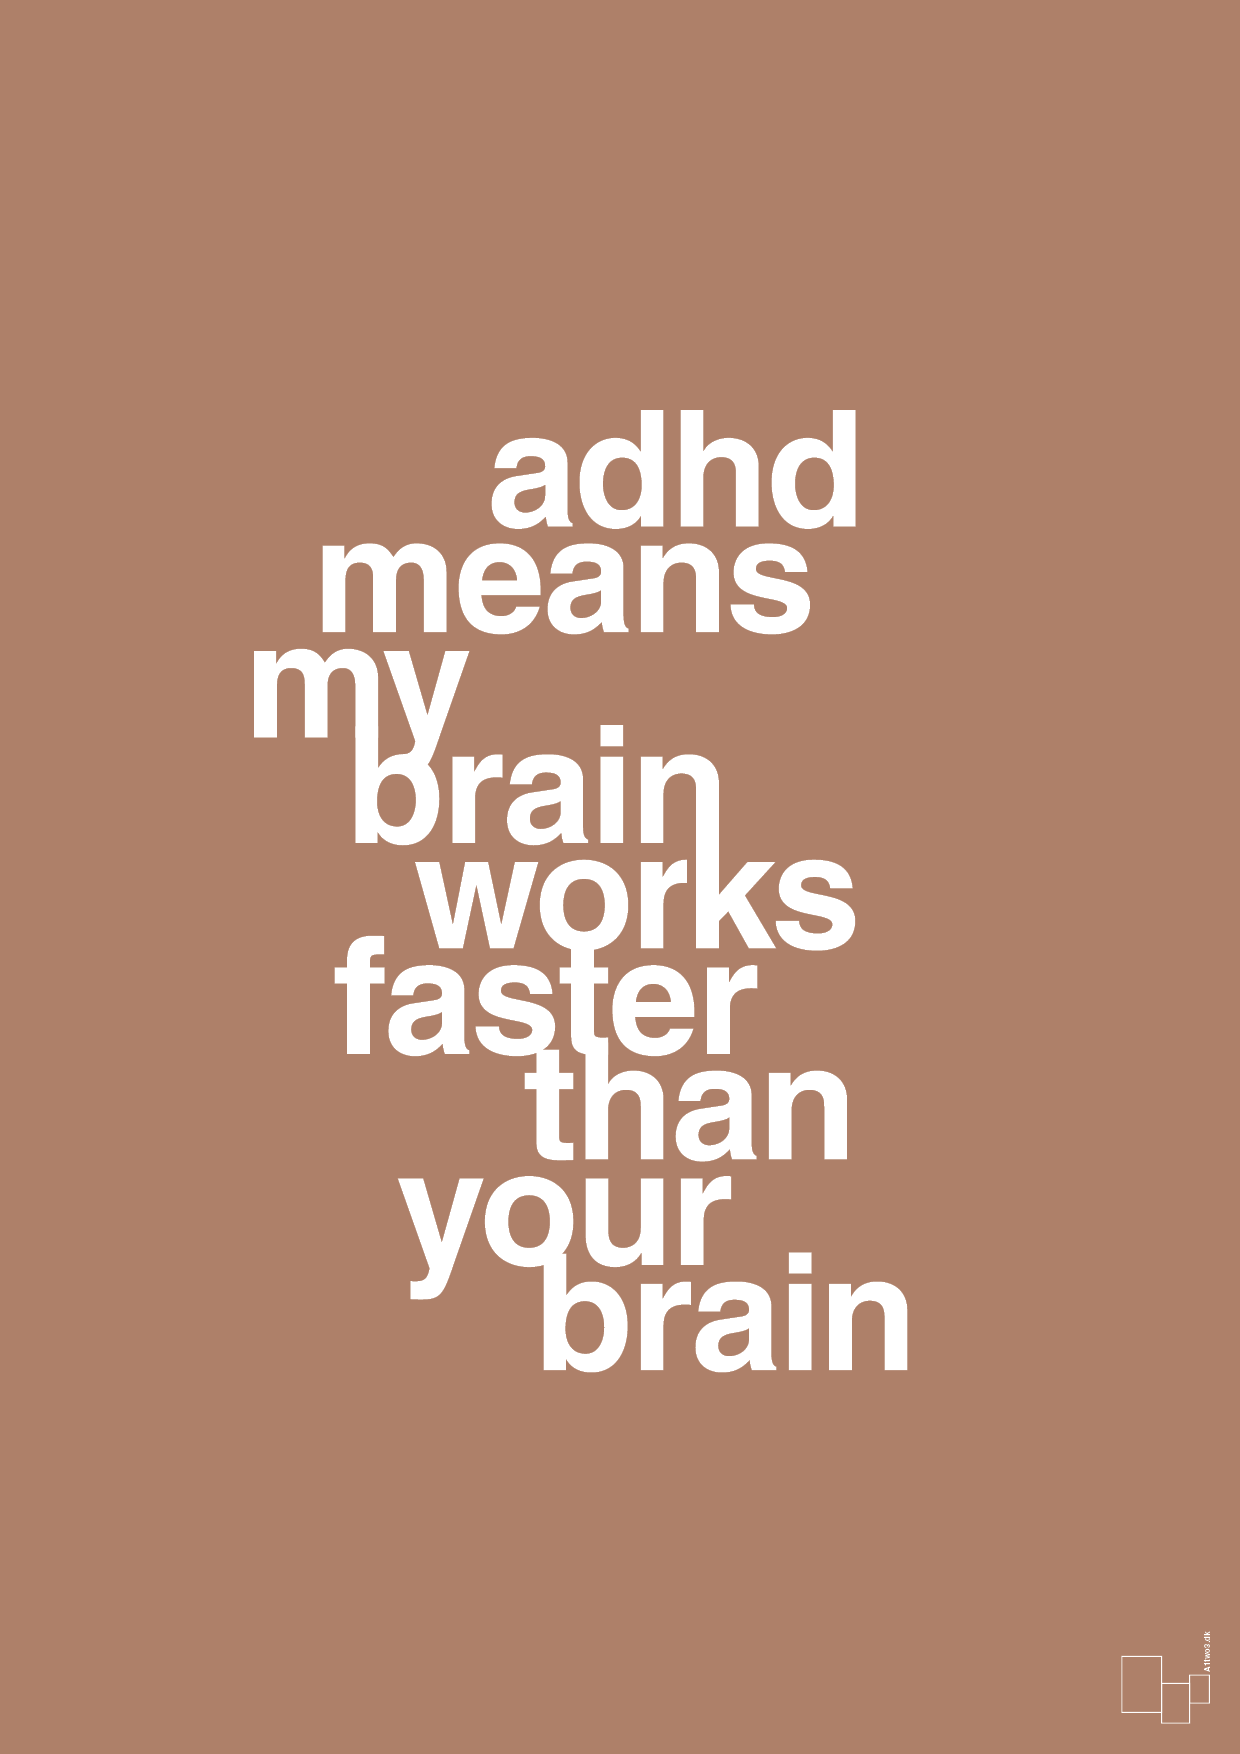 adhd means my brain works faster than your brain - Plakat med Samfund i Cider Spice